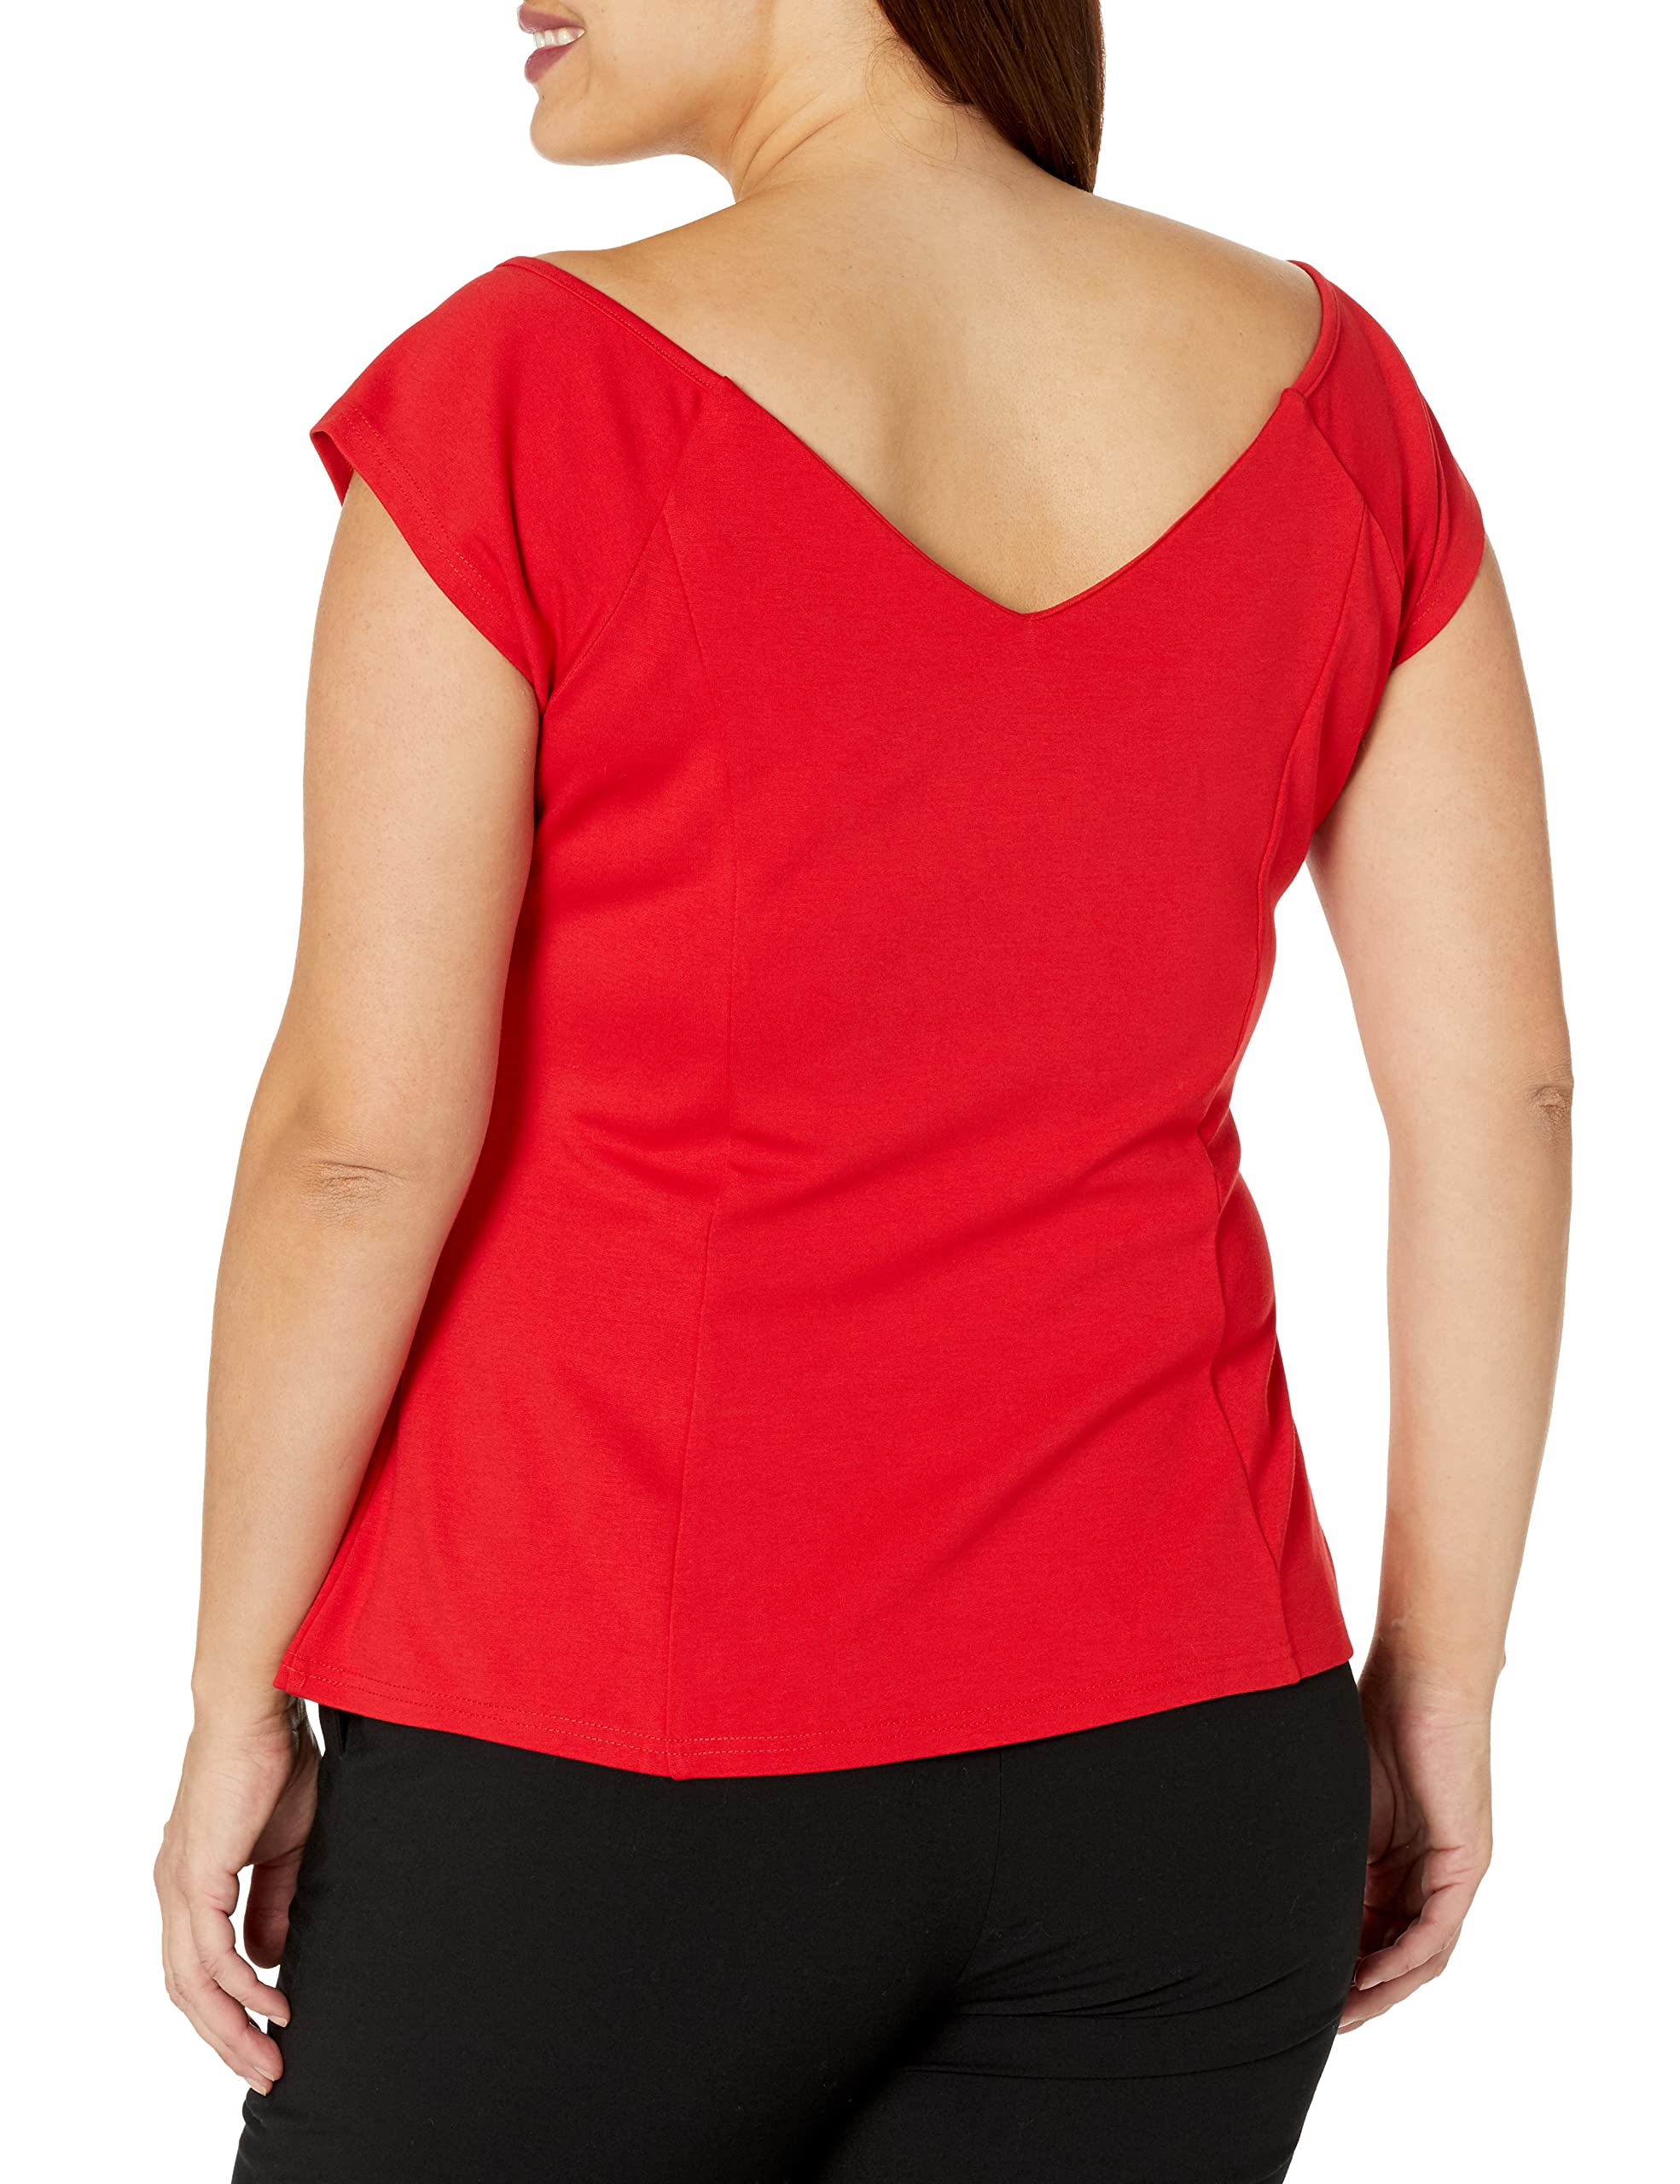 City Chic Plus Size TOP Miss Vintage in RED, Size 20